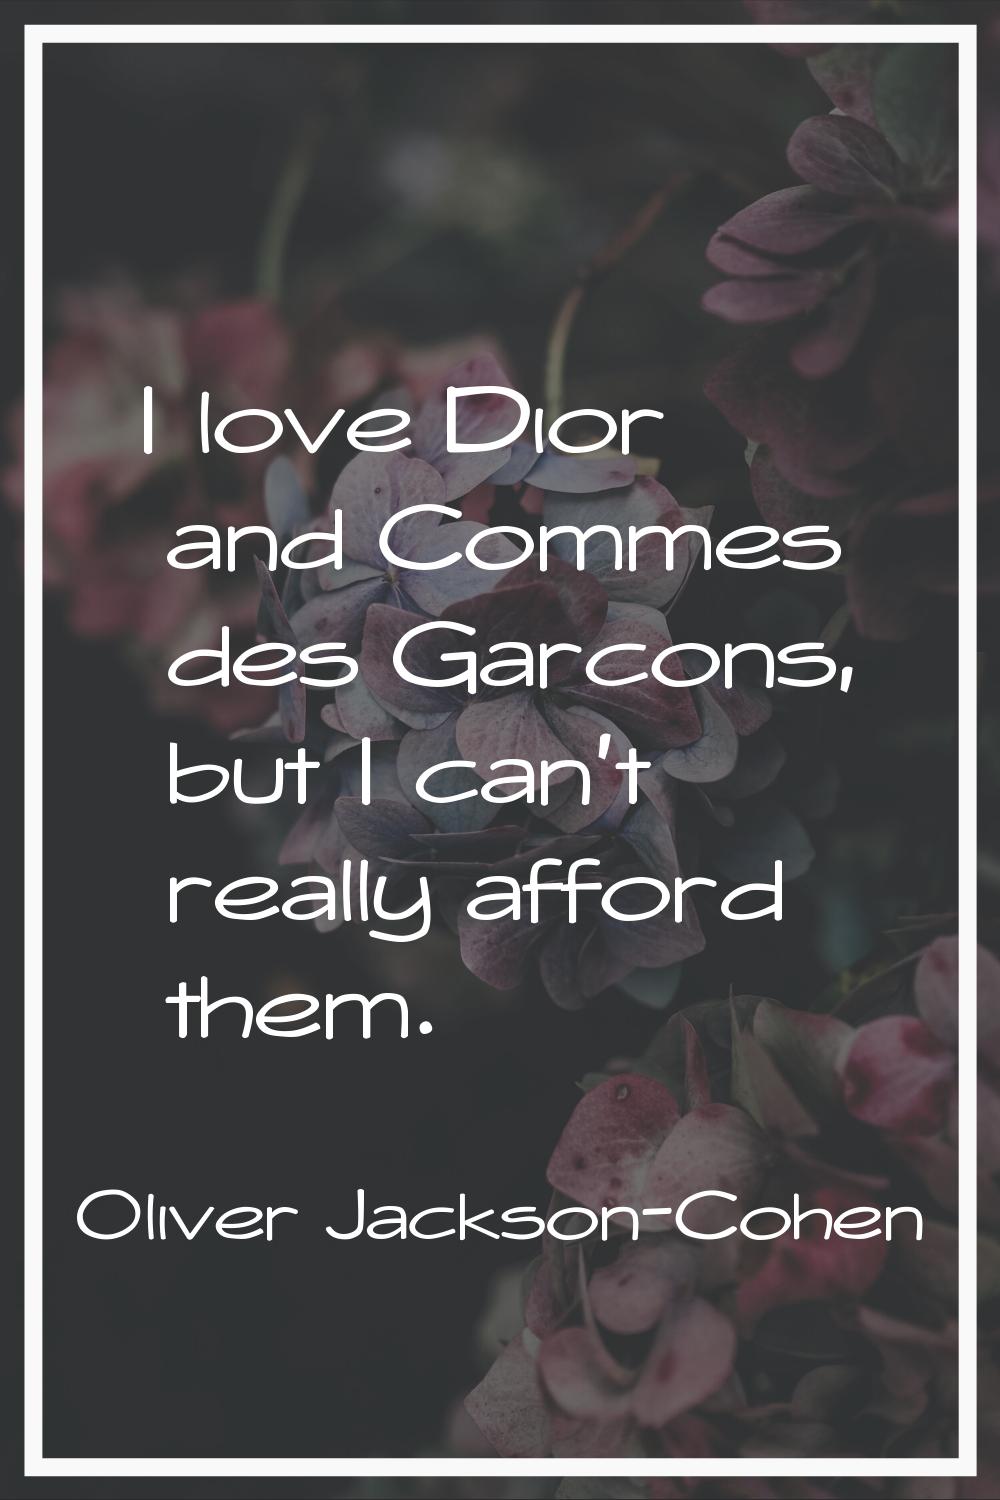 I love Dior and Commes des Garcons, but I can't really afford them.